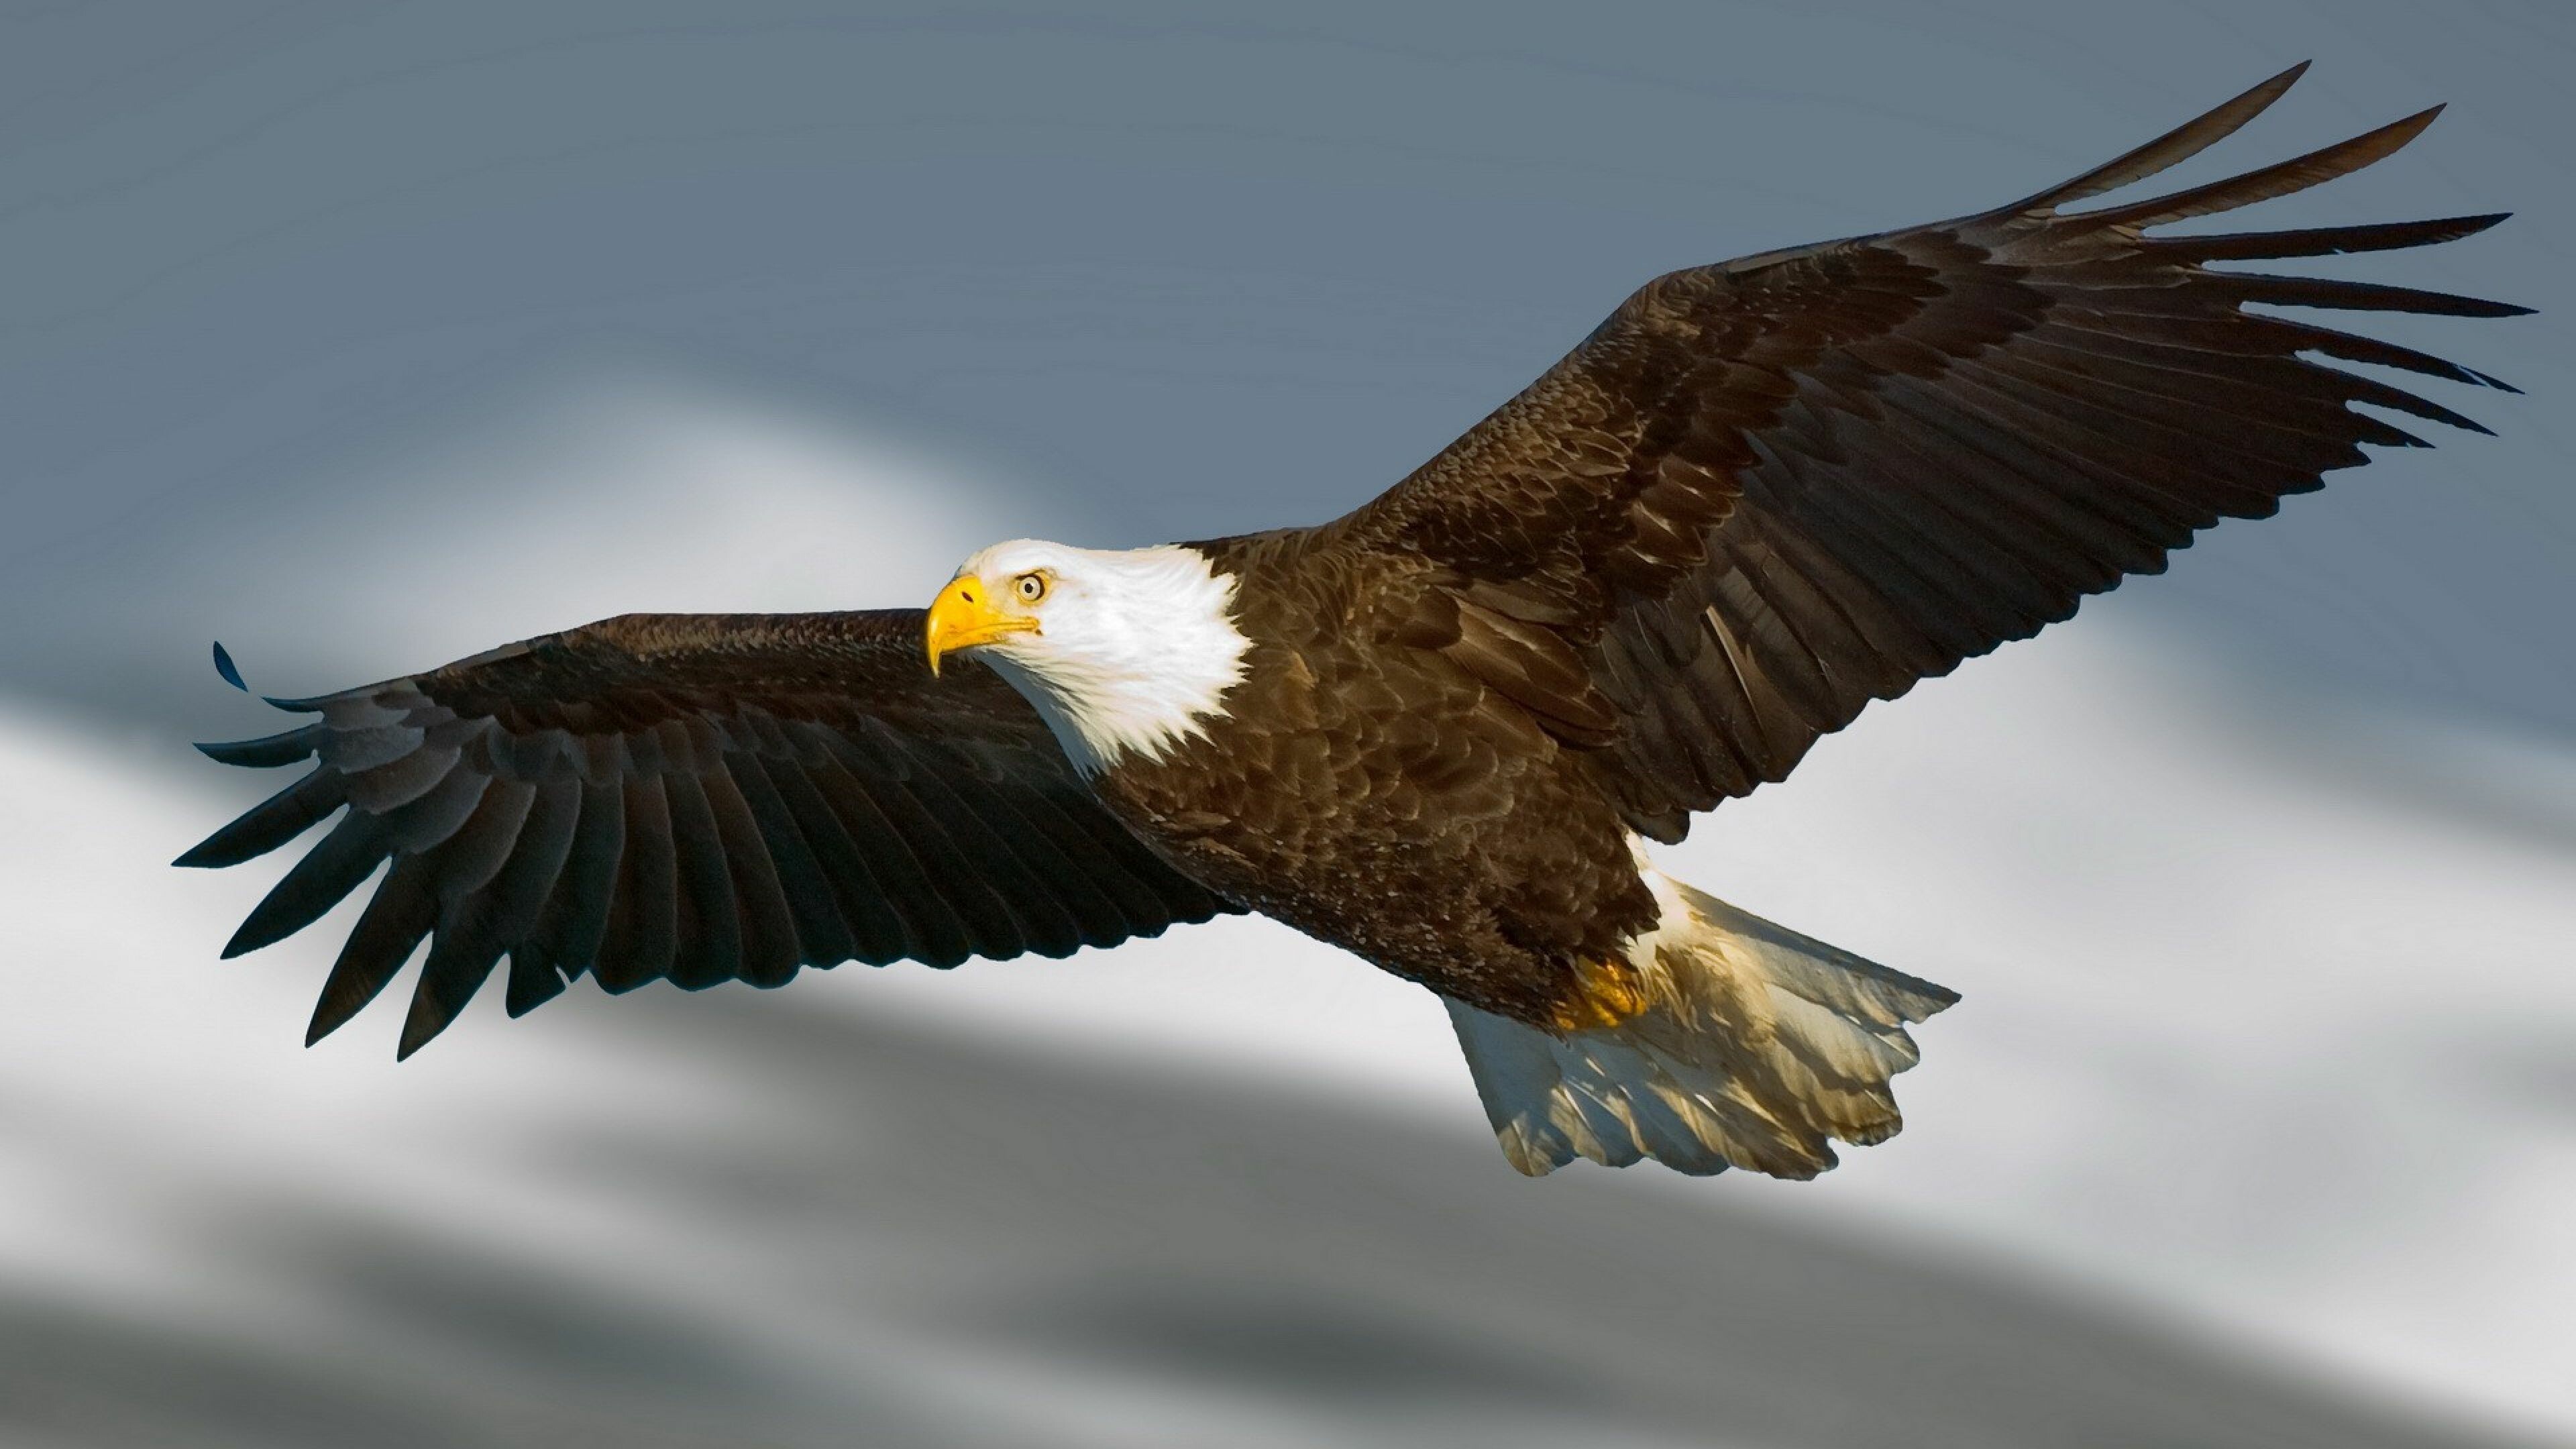 8+ 4K Eagle Wallpapers: HD, 4K, 5K for PC and Mobile | Download free images  for iPhone, Android